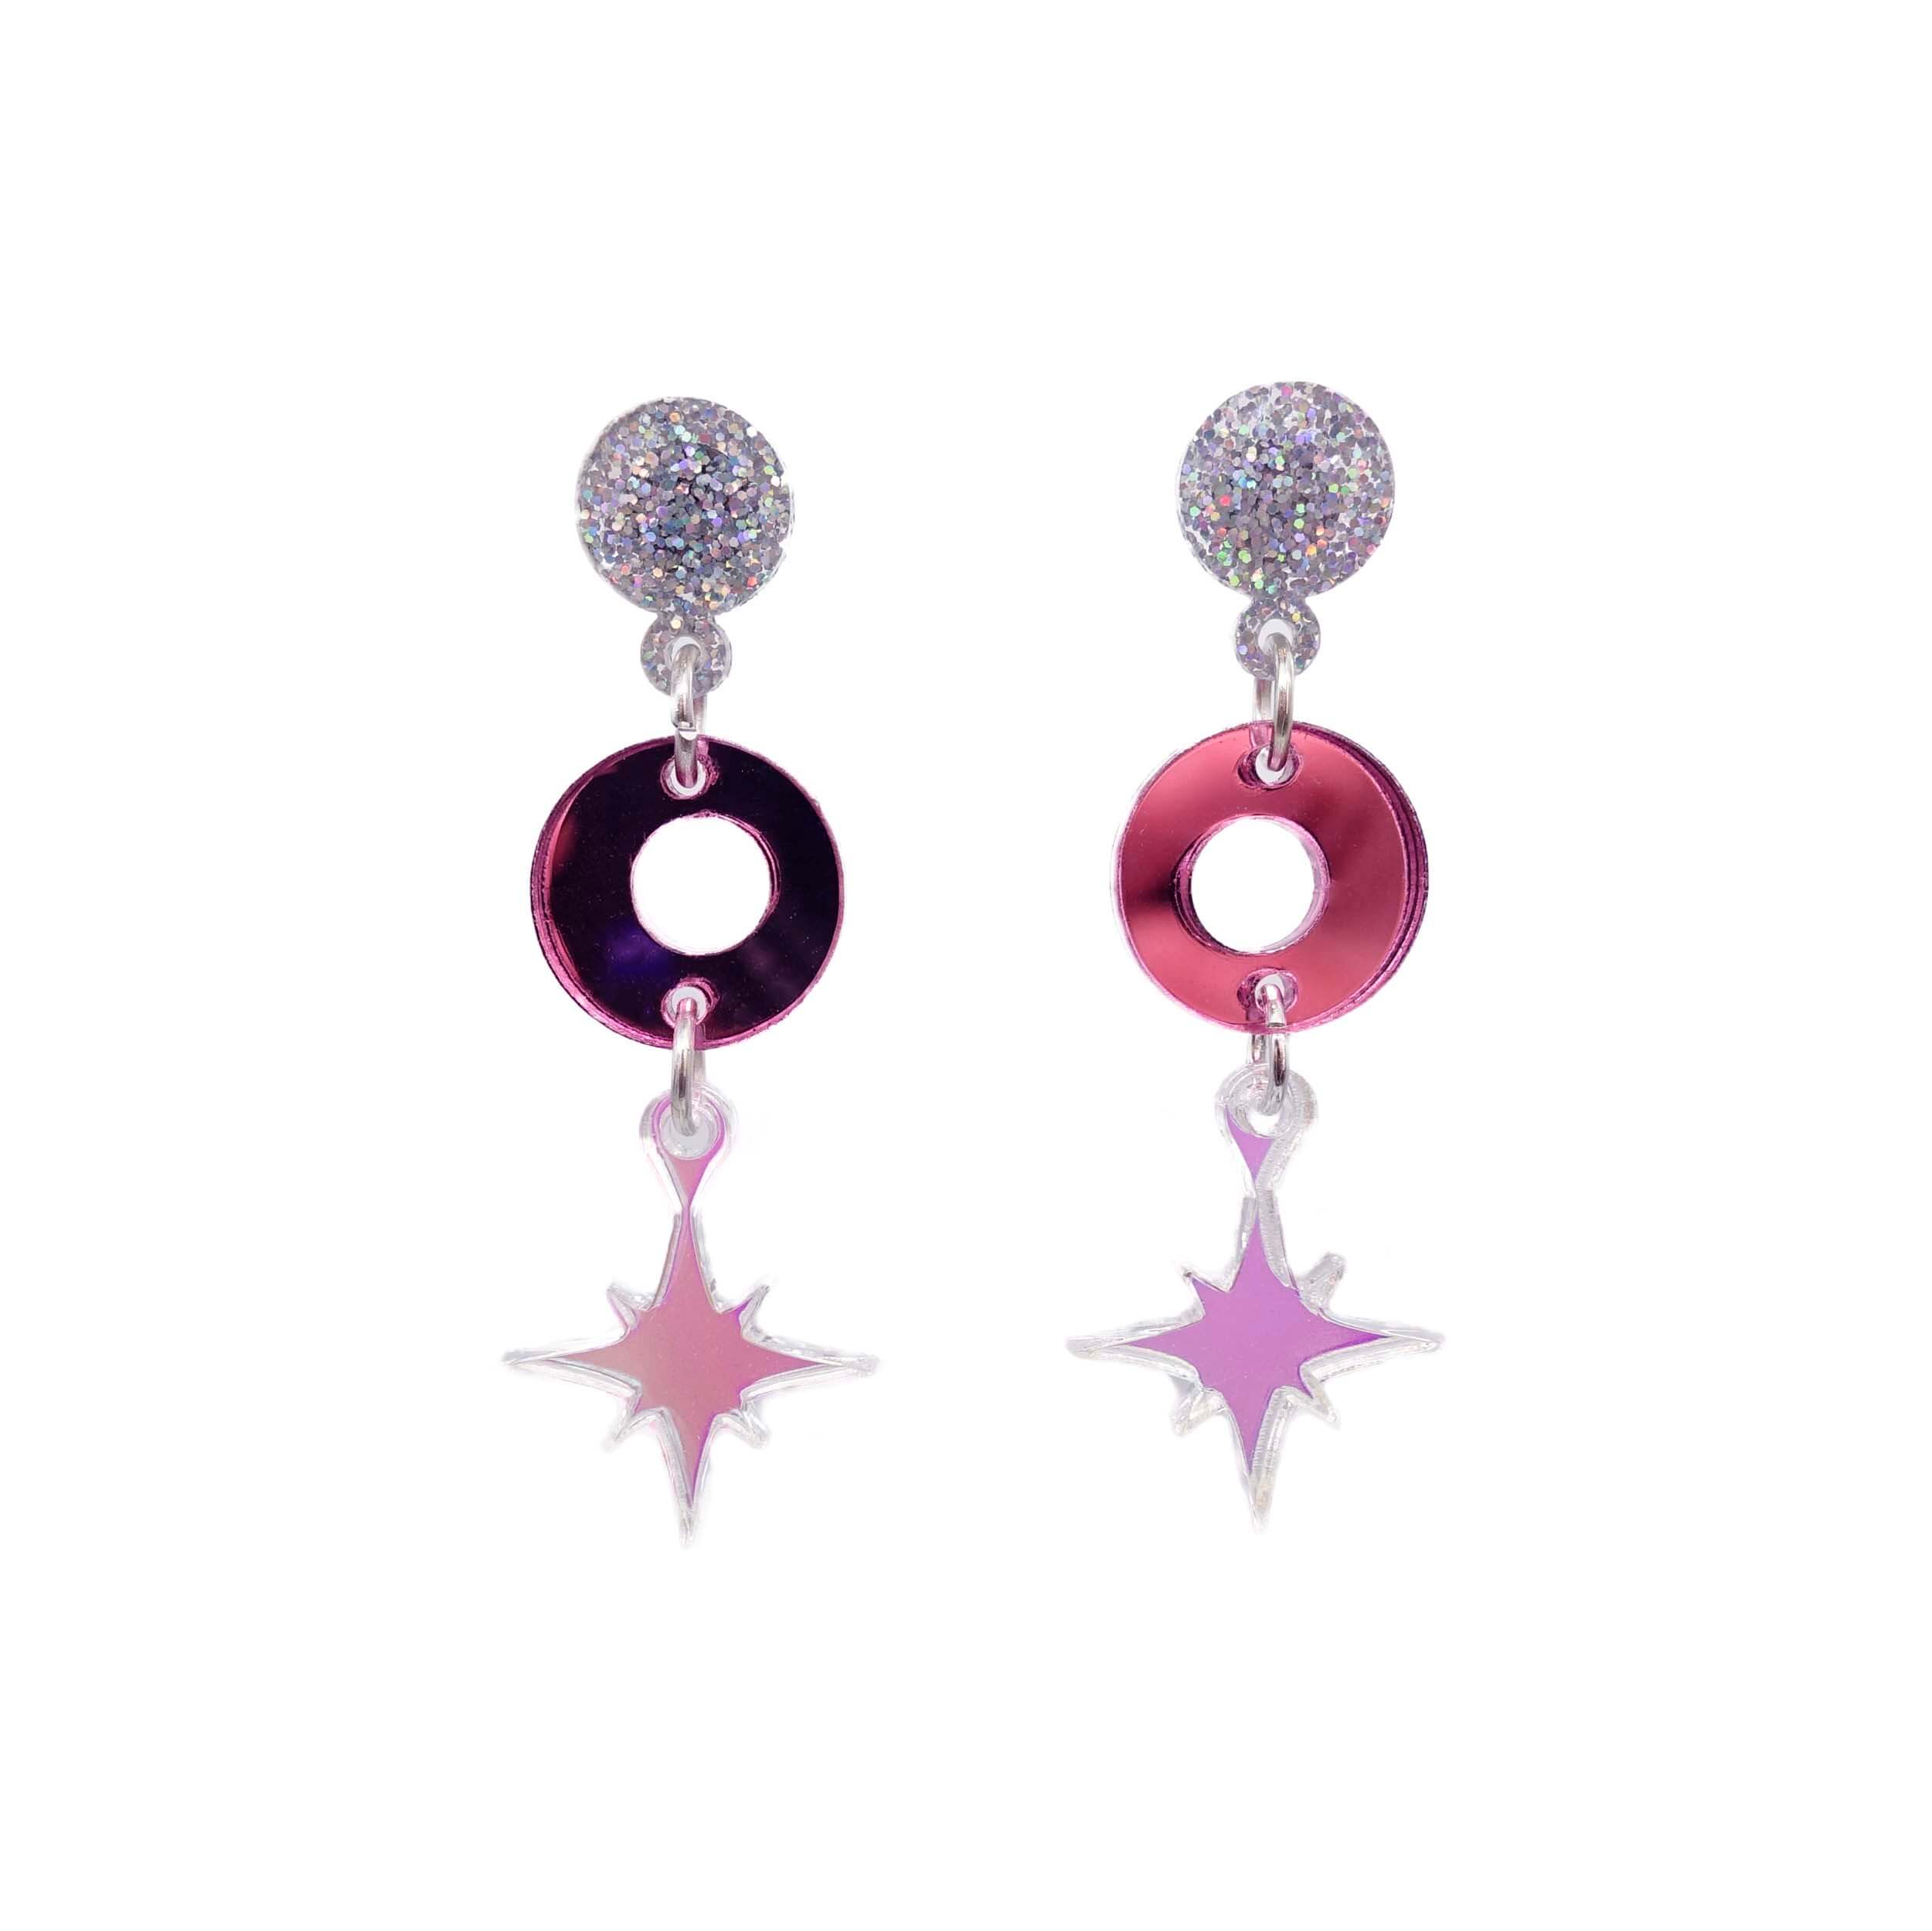 Pink and iridescent Deco Star earrings shown on white background. 